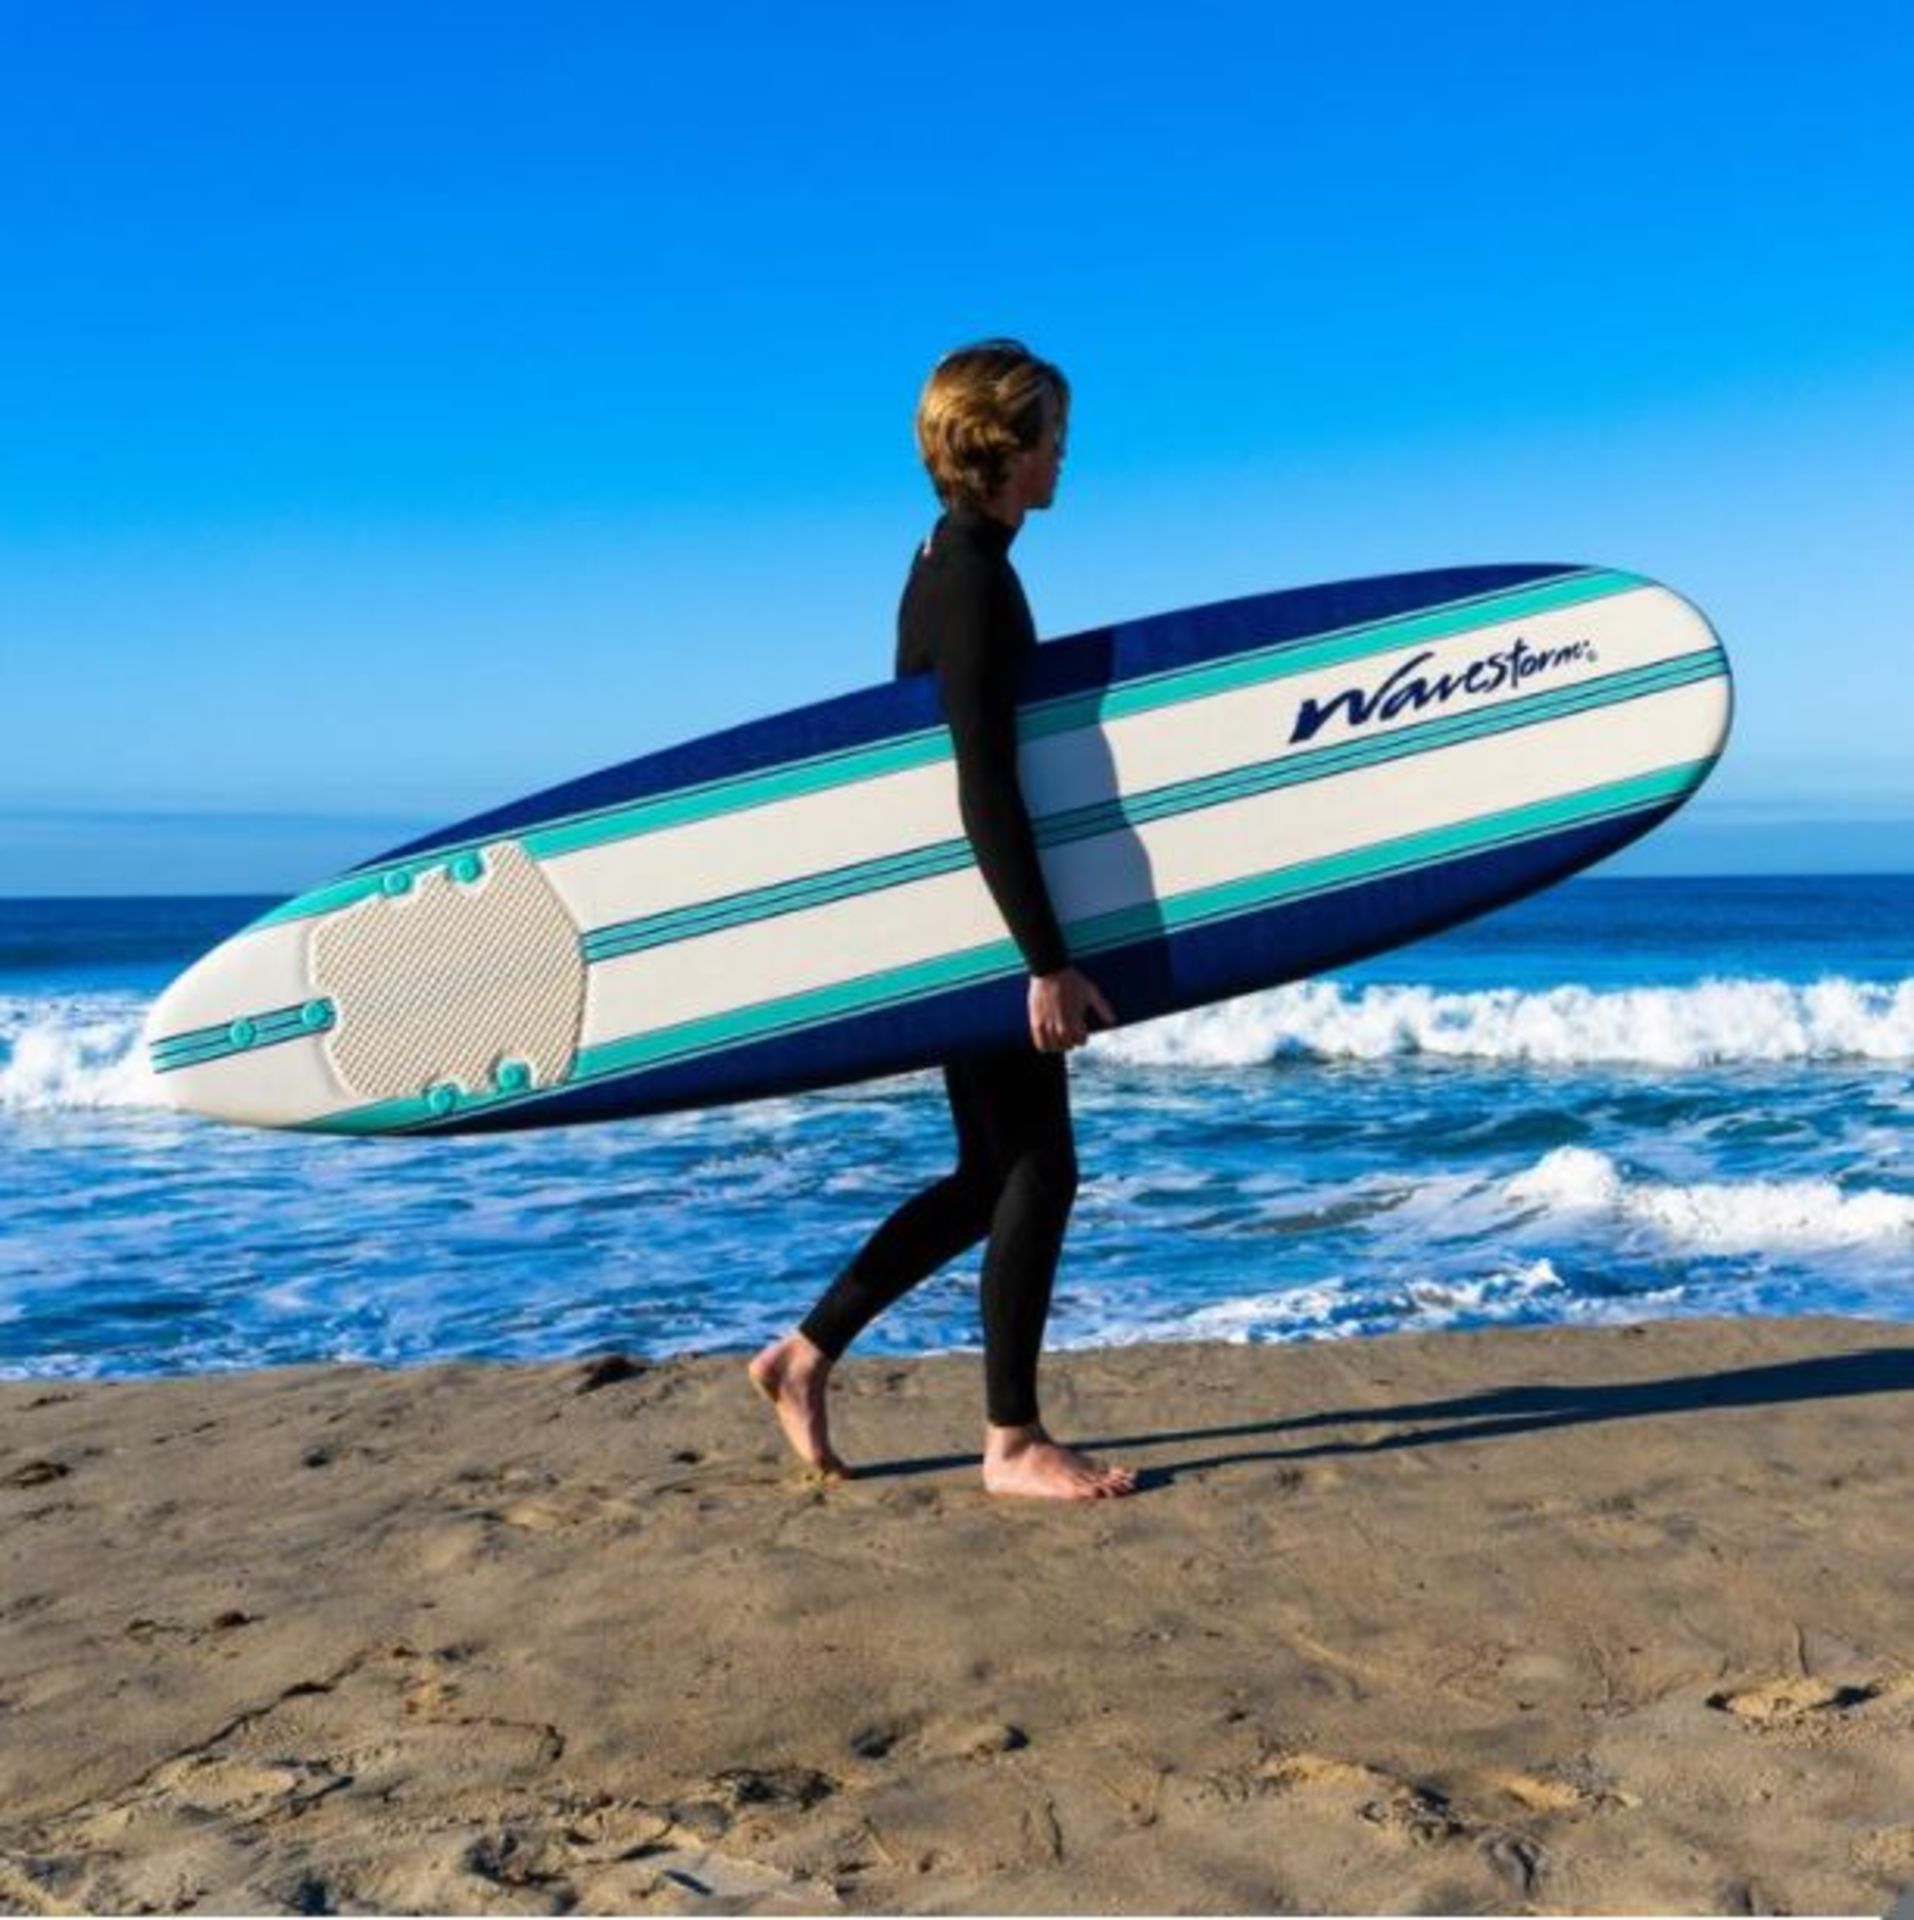 1 WAVESTORM 8FT CLASSIC LIGHTWEIGHT SURFBOARD RRP Â£199 (PICTURES FOR ILLUSTRATION PURPOSES ONLY)